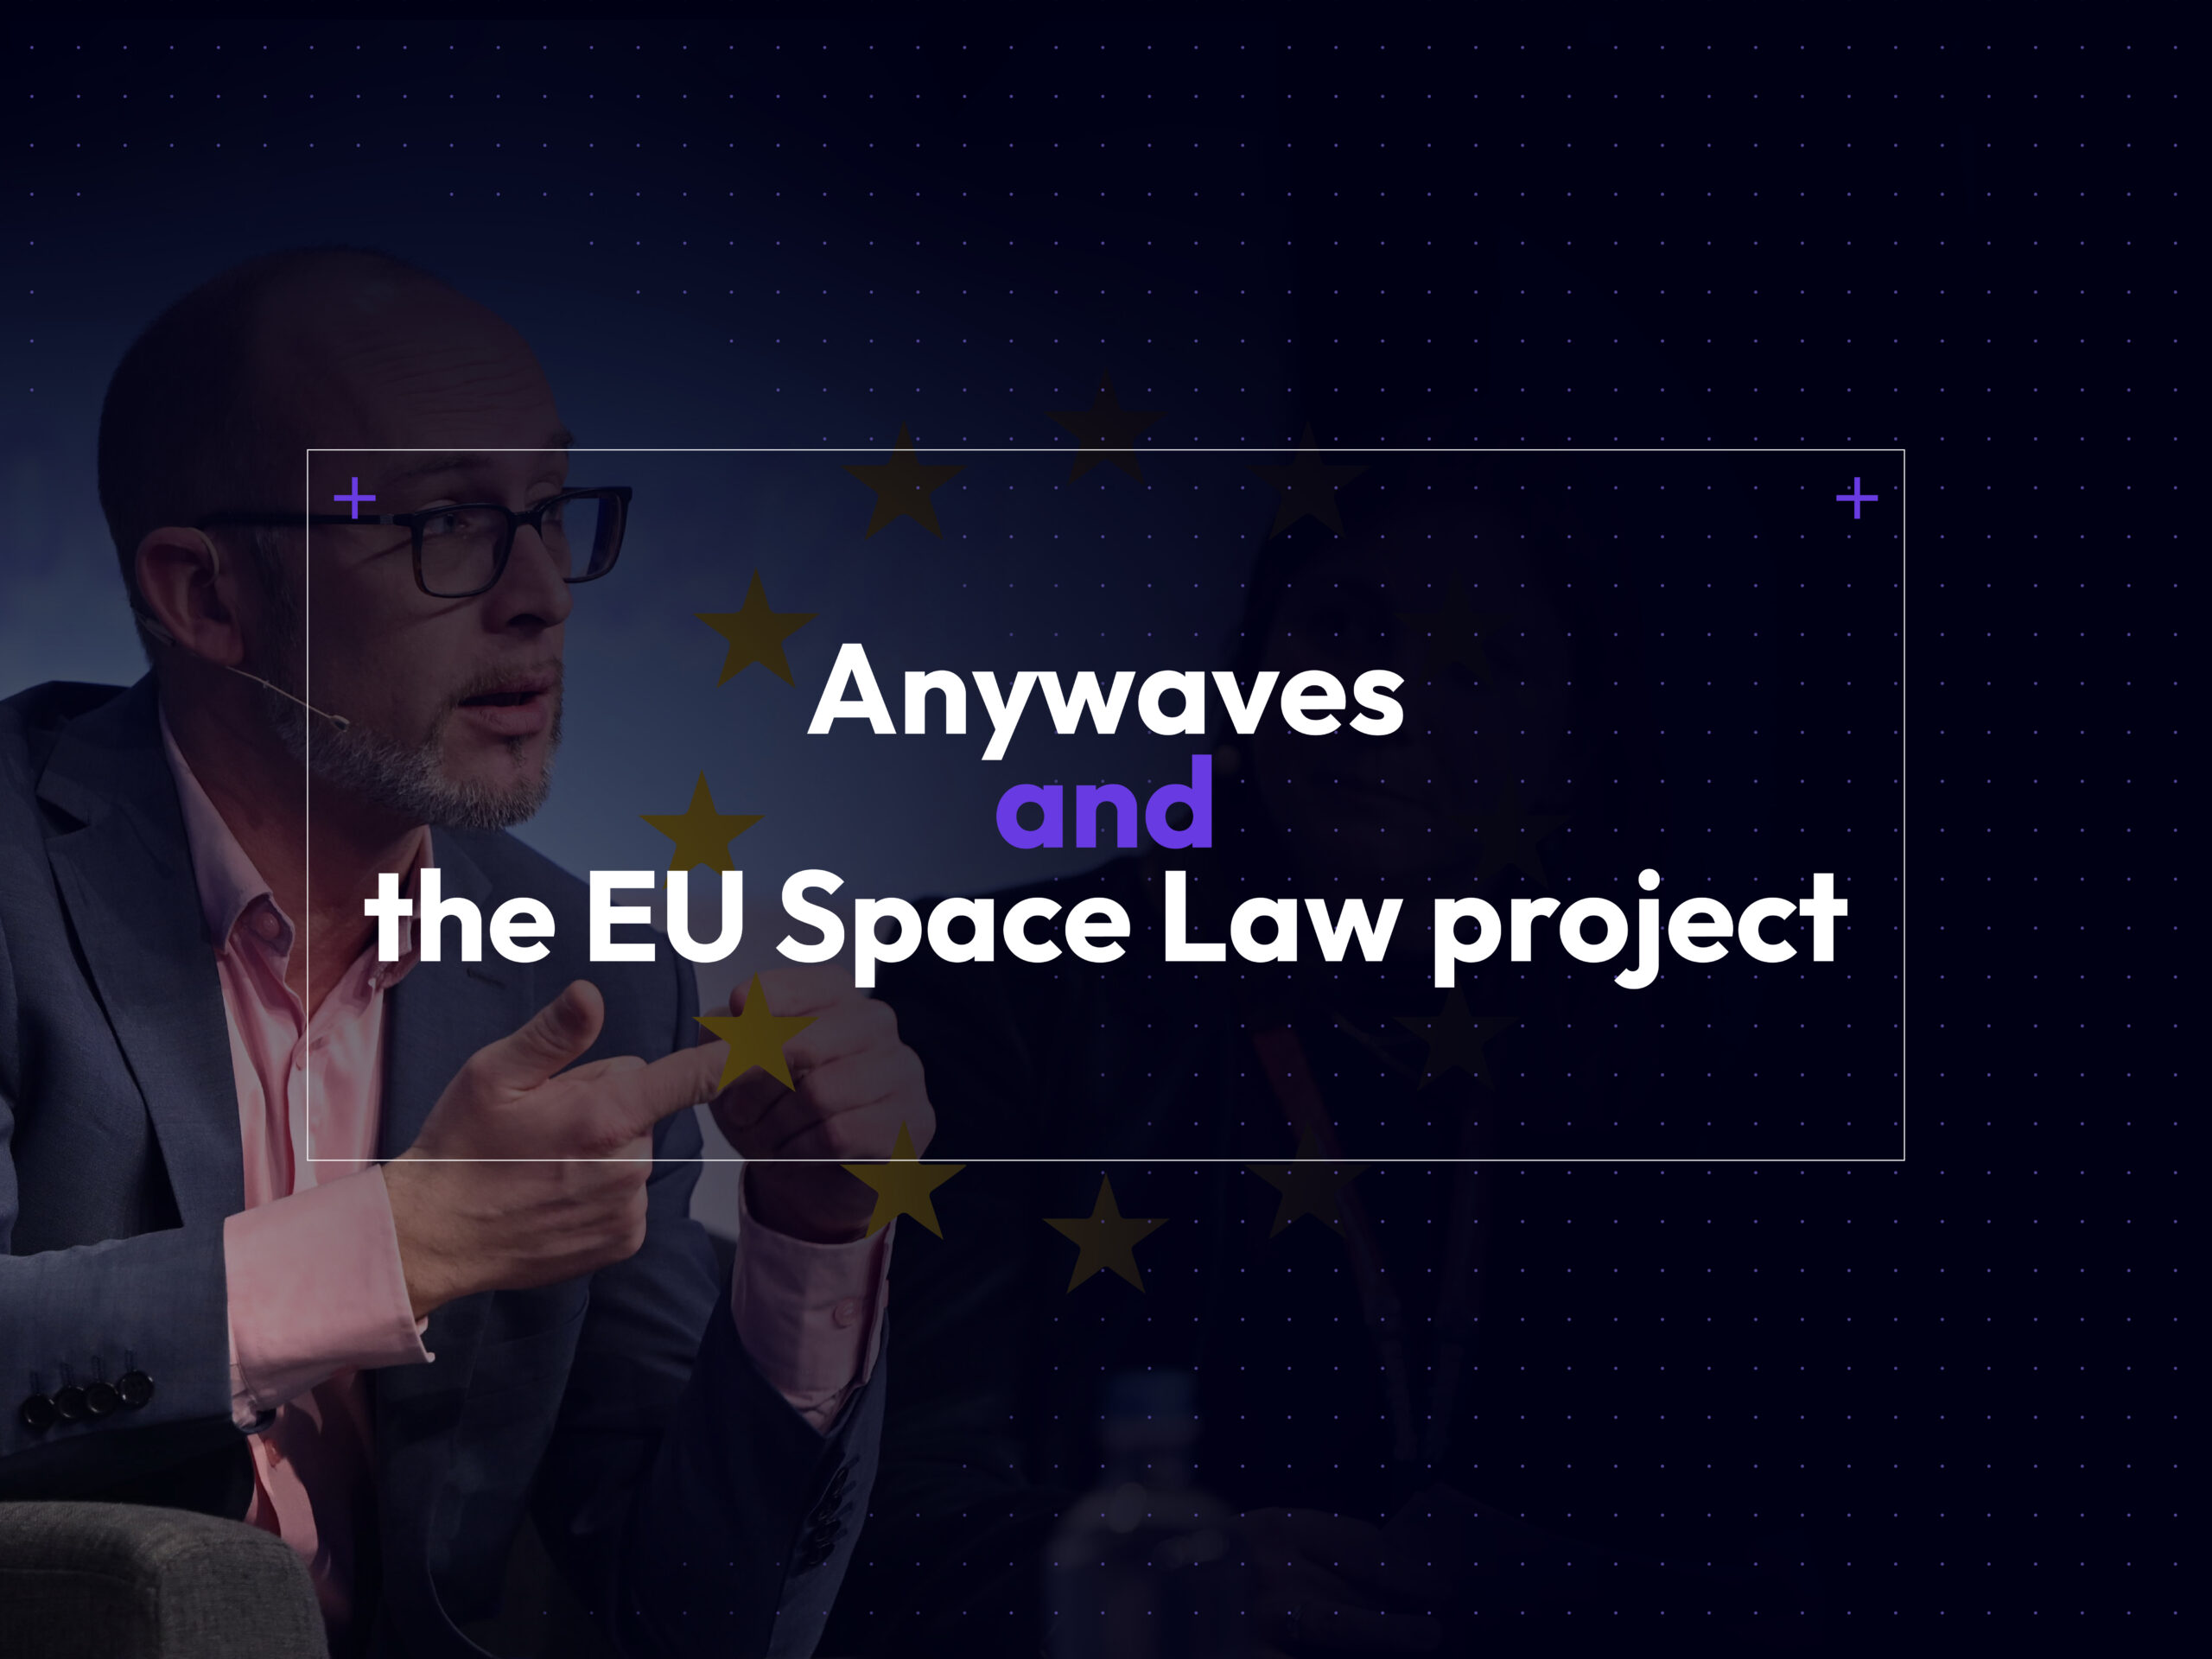 Anywaves and the EU Space Law project